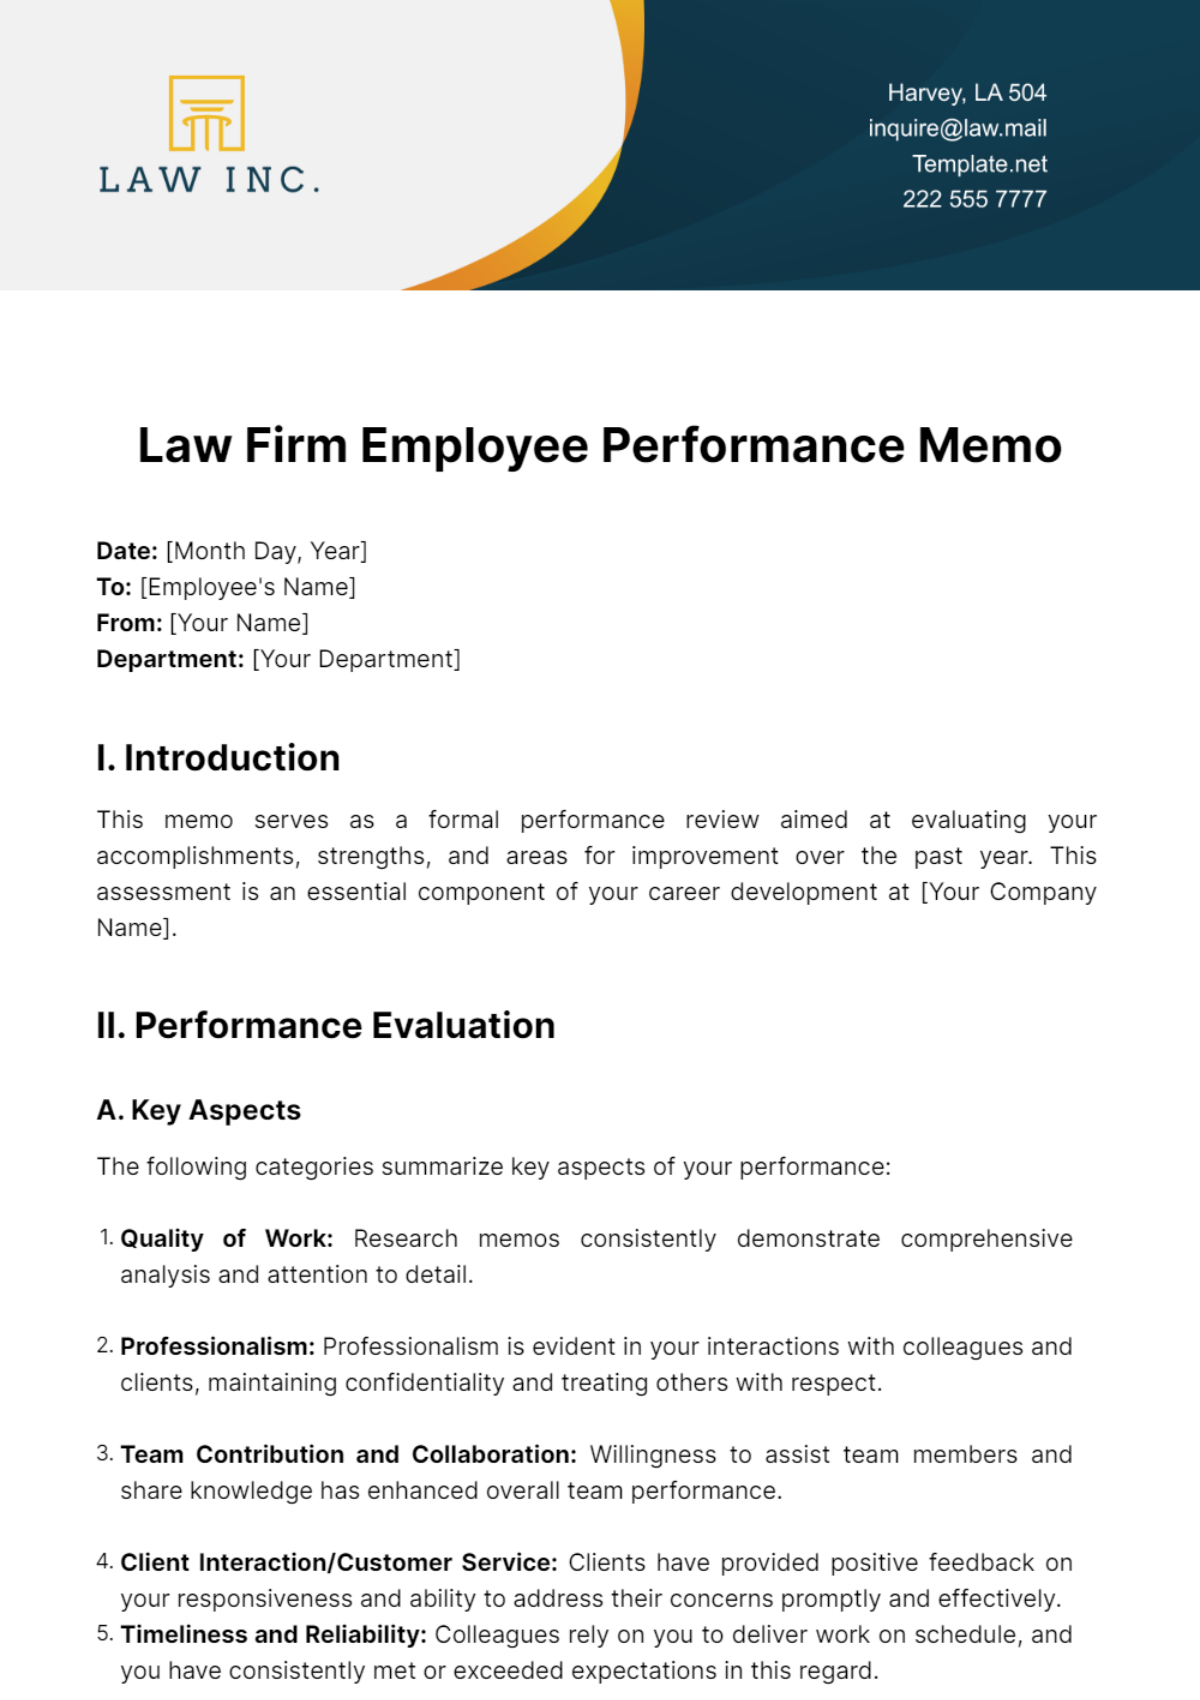 Law Firm Employee Performance Memo Template